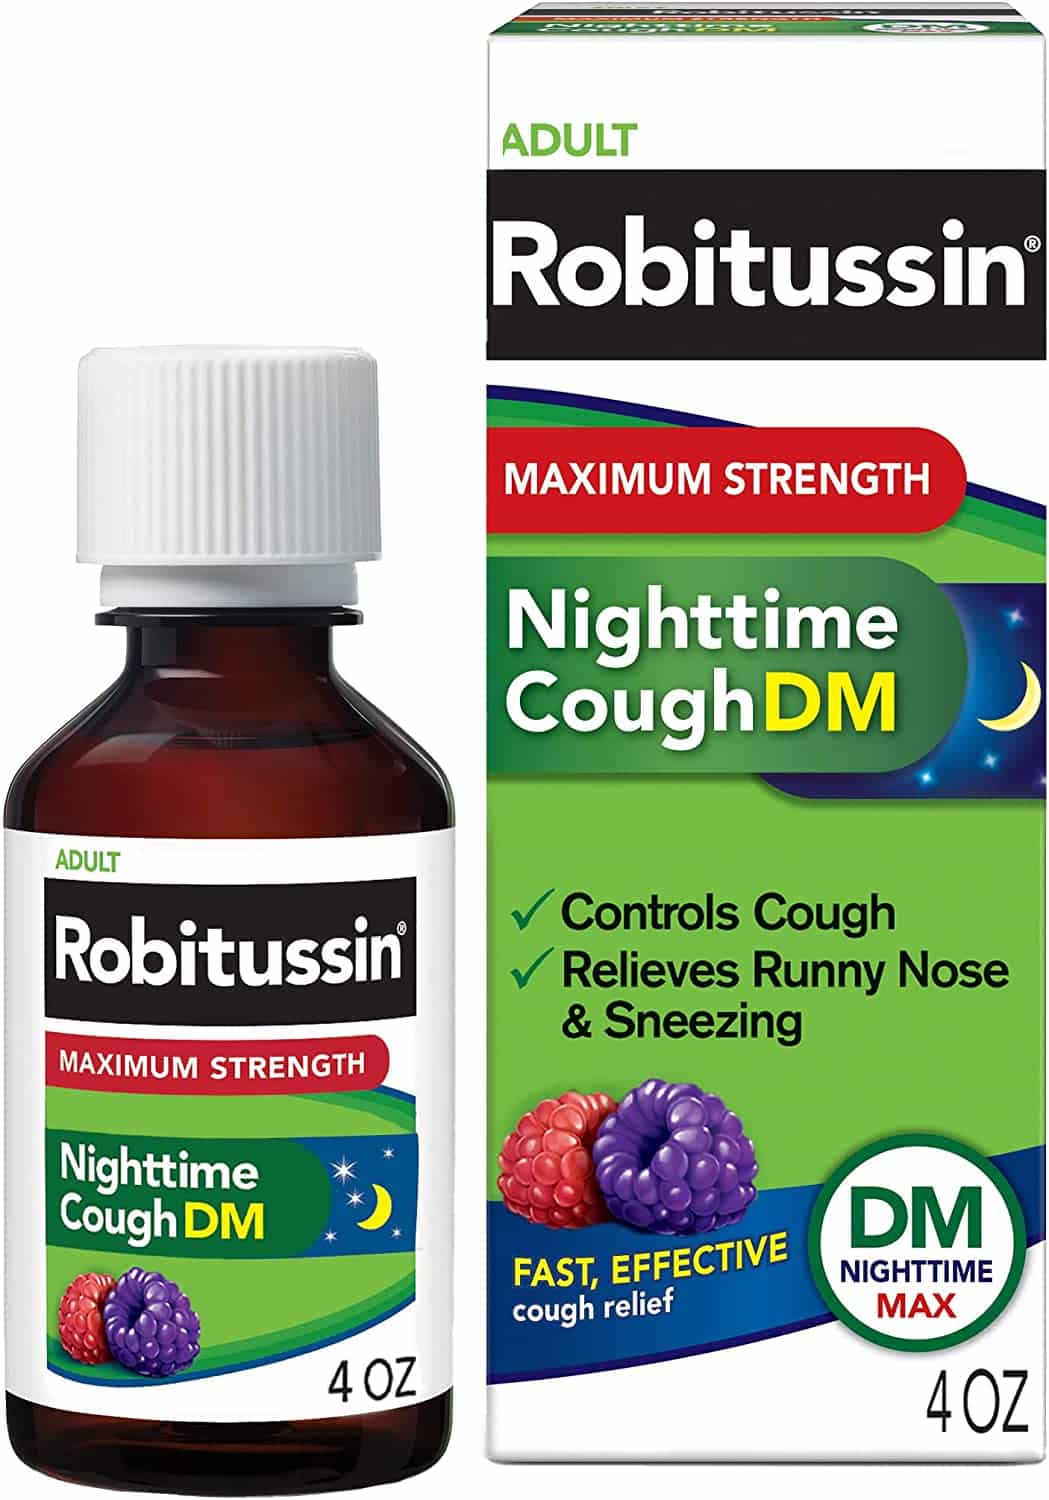 Robitussin